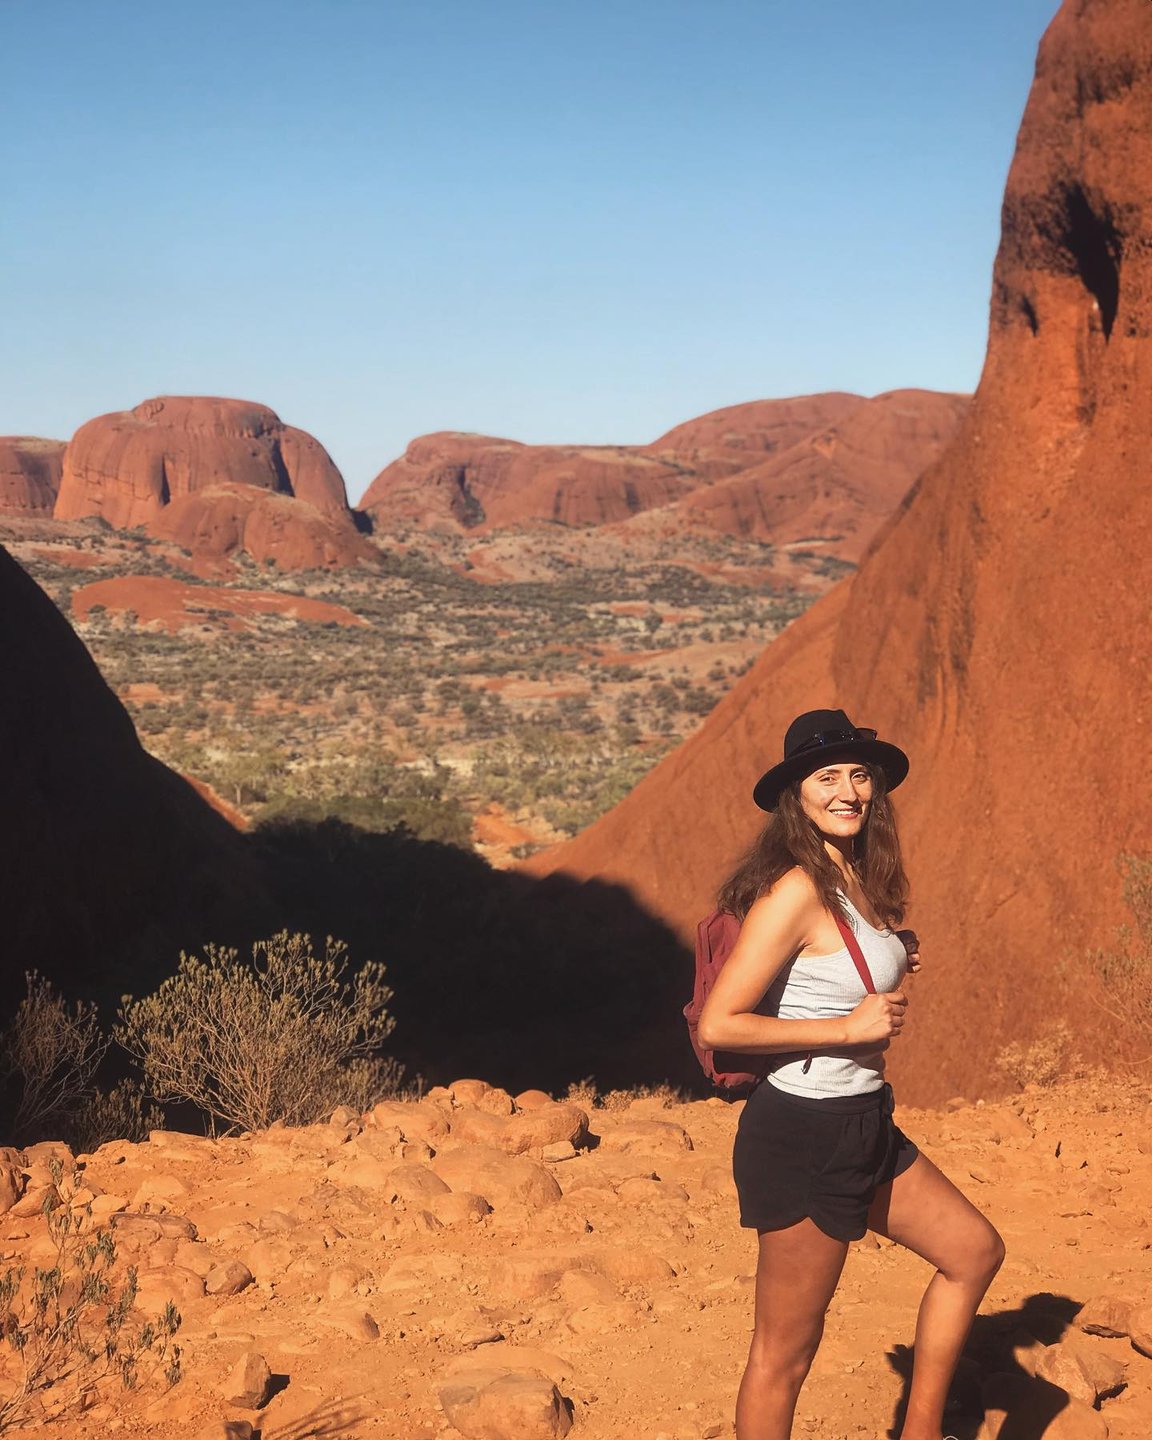 A woman hikes in Australia's Red Centre